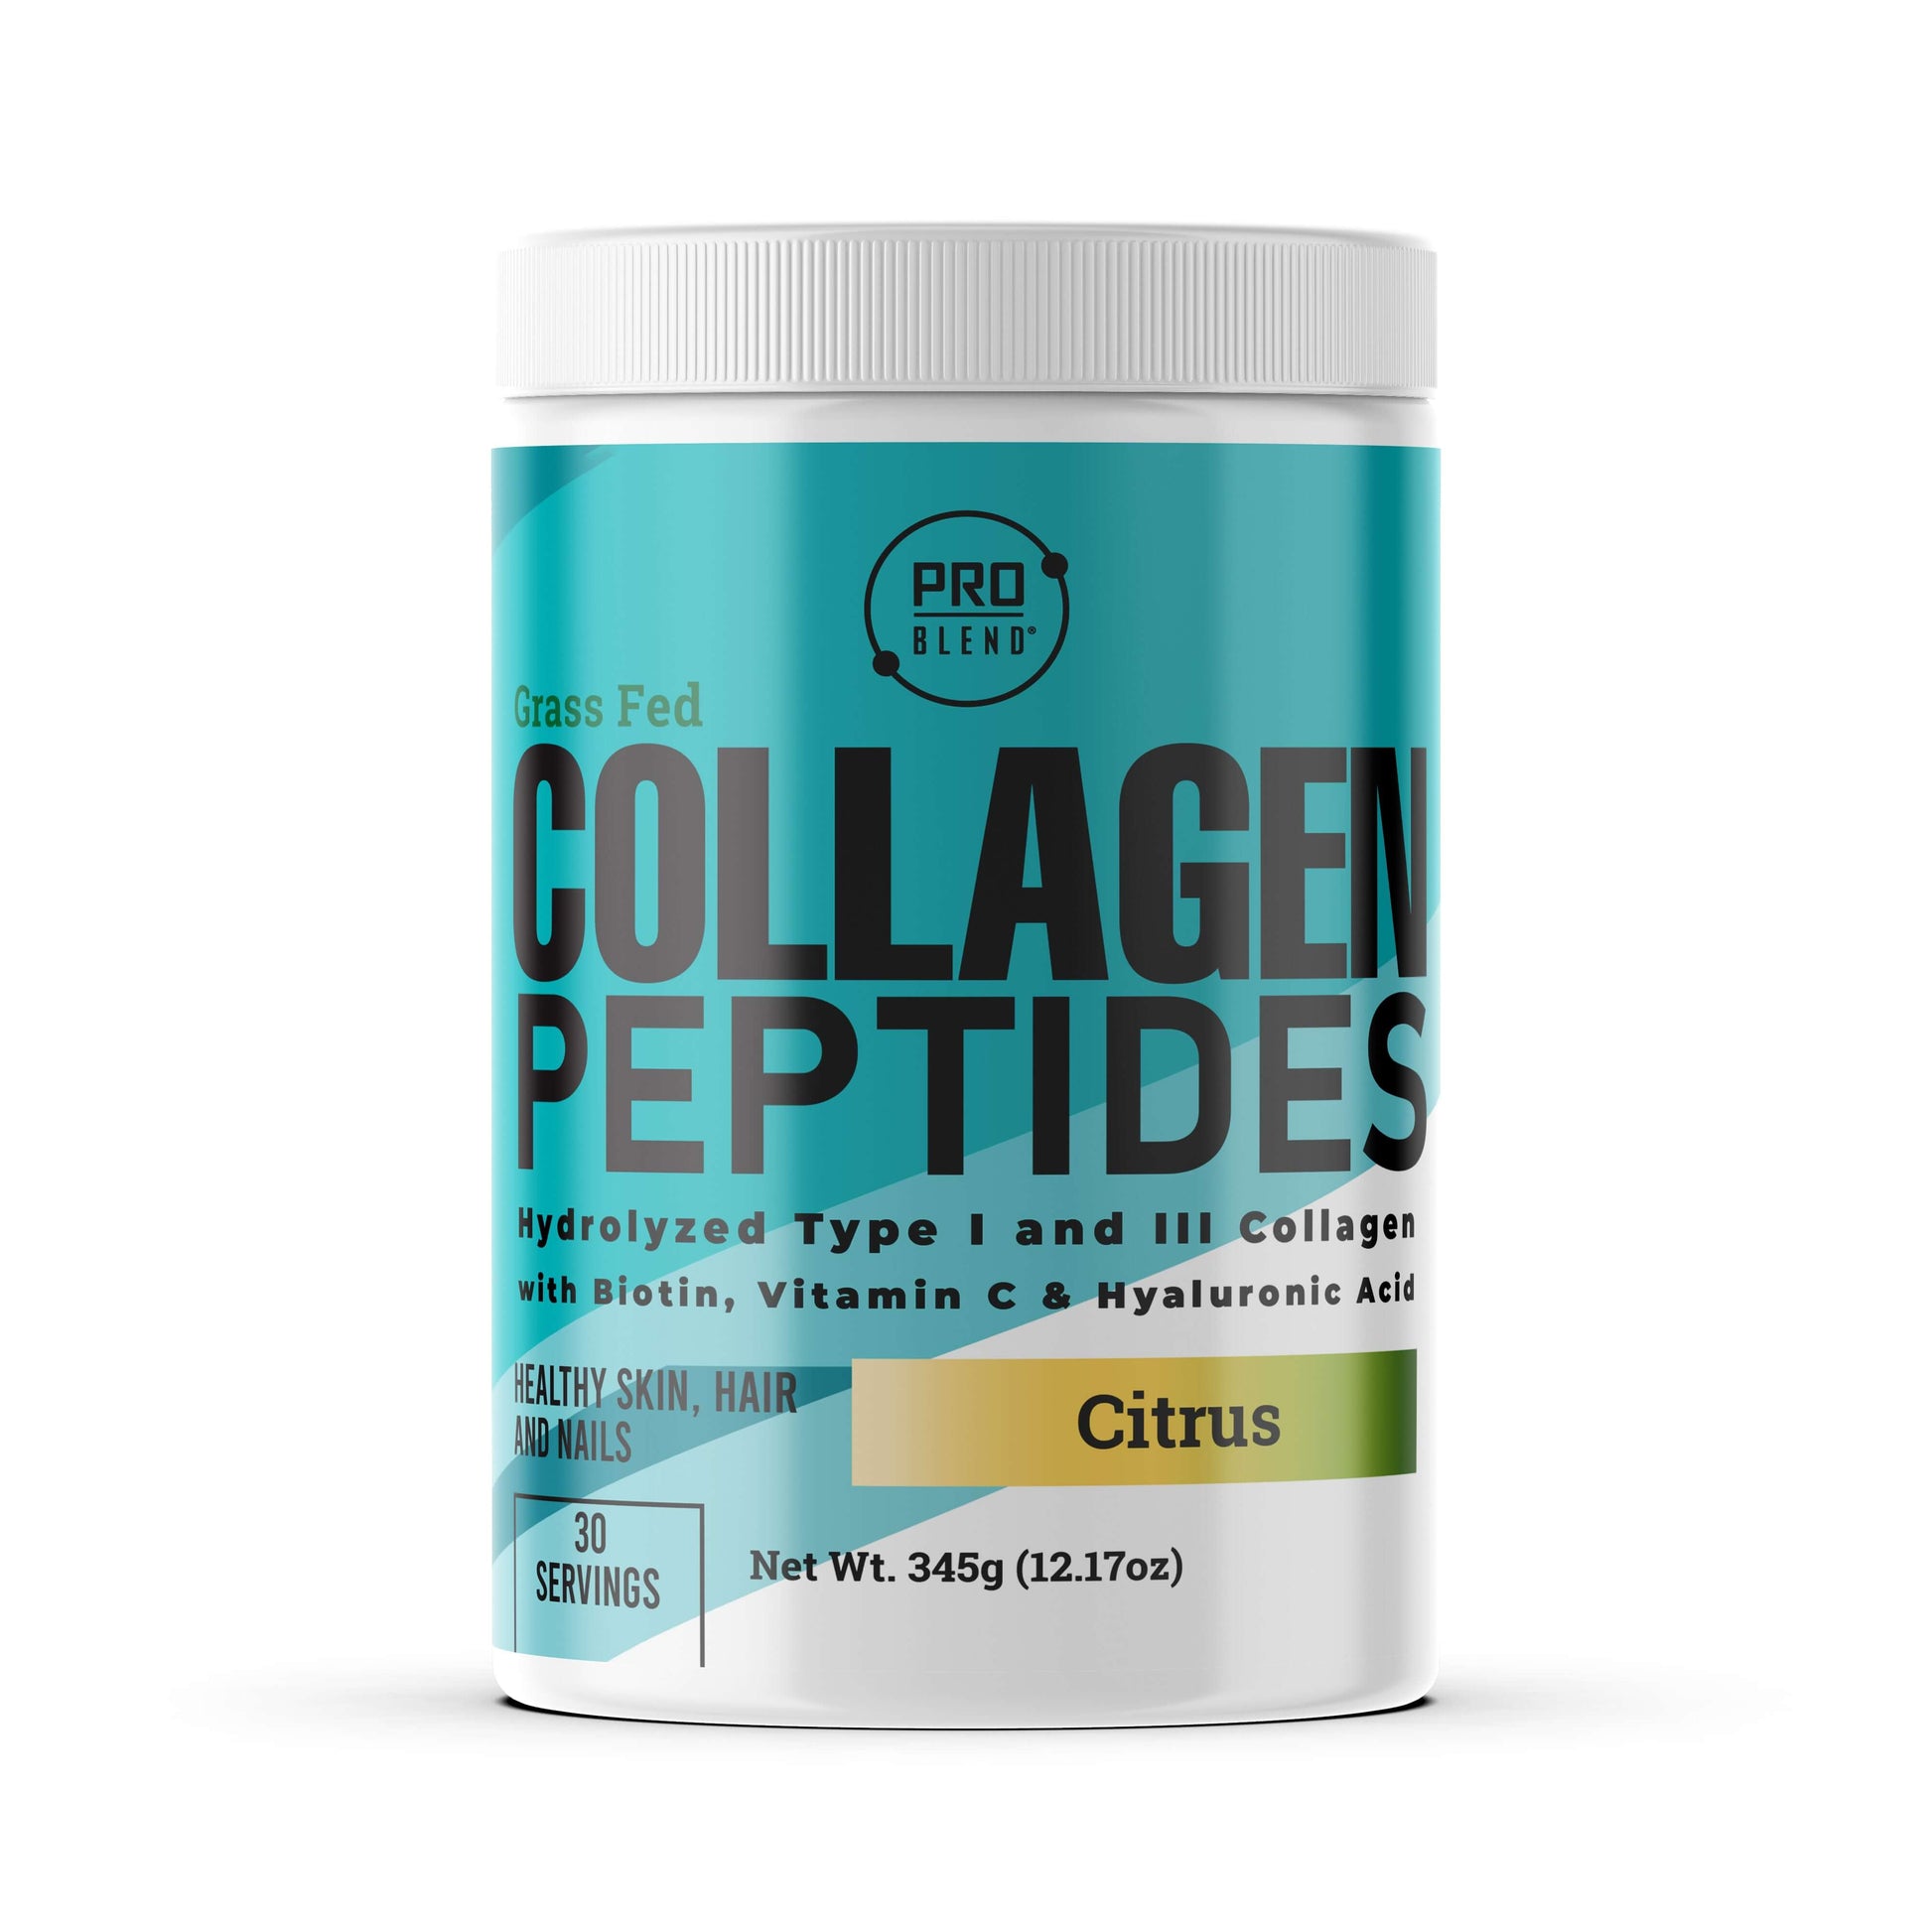 PRO BLEND Grass Fed COLLAGEN PEPTIDES, Hydrolyzed Type I and III Collagen with Biotin, Vitamin C & Hyaluronic Acid PRO BLEND